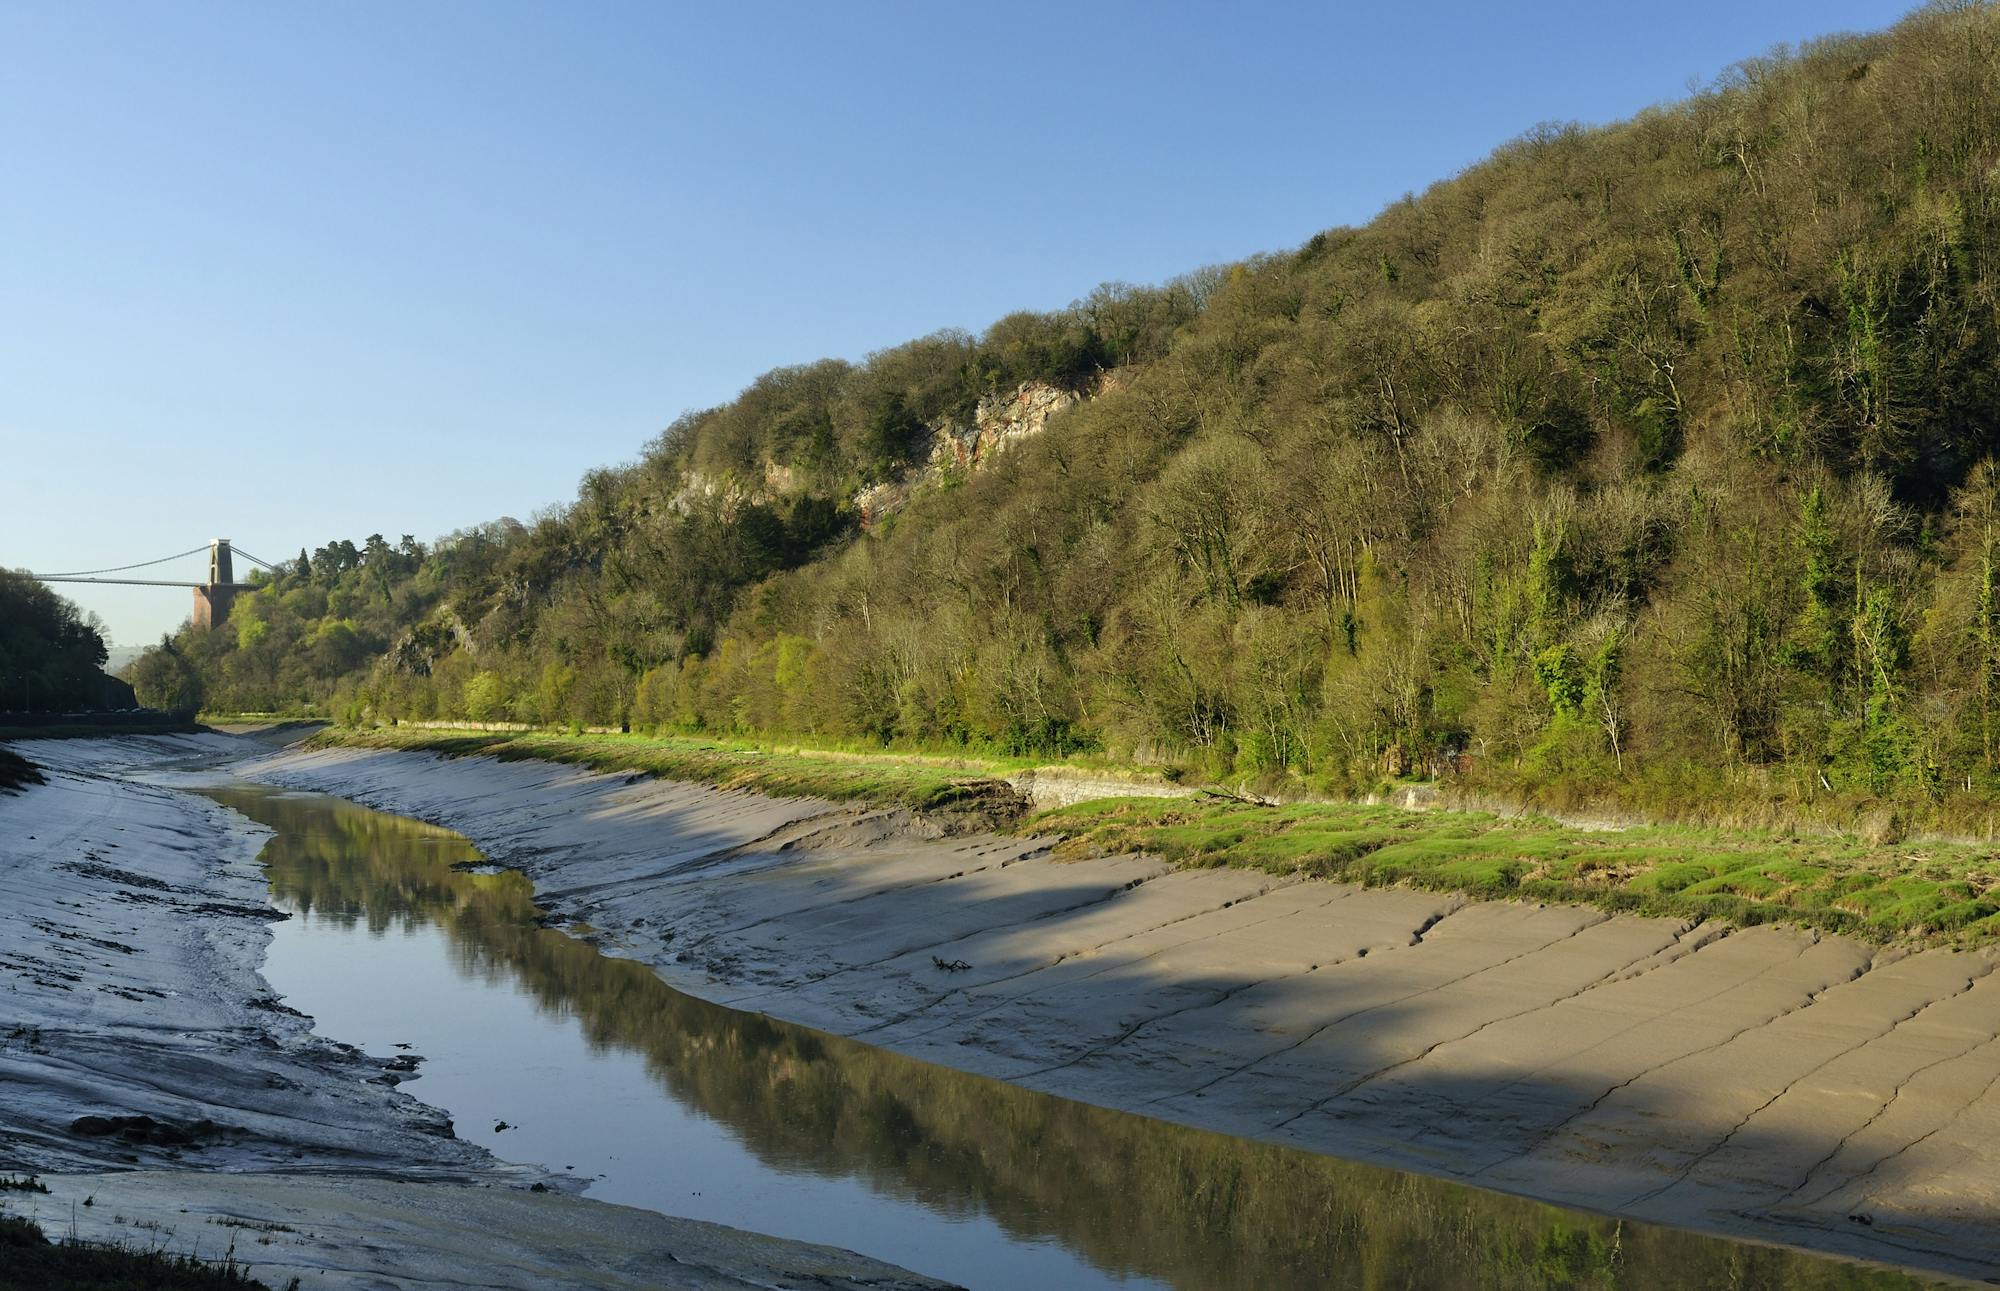 Early morning sun & low water in Avon Gorge with Clifton Suspension Bridge